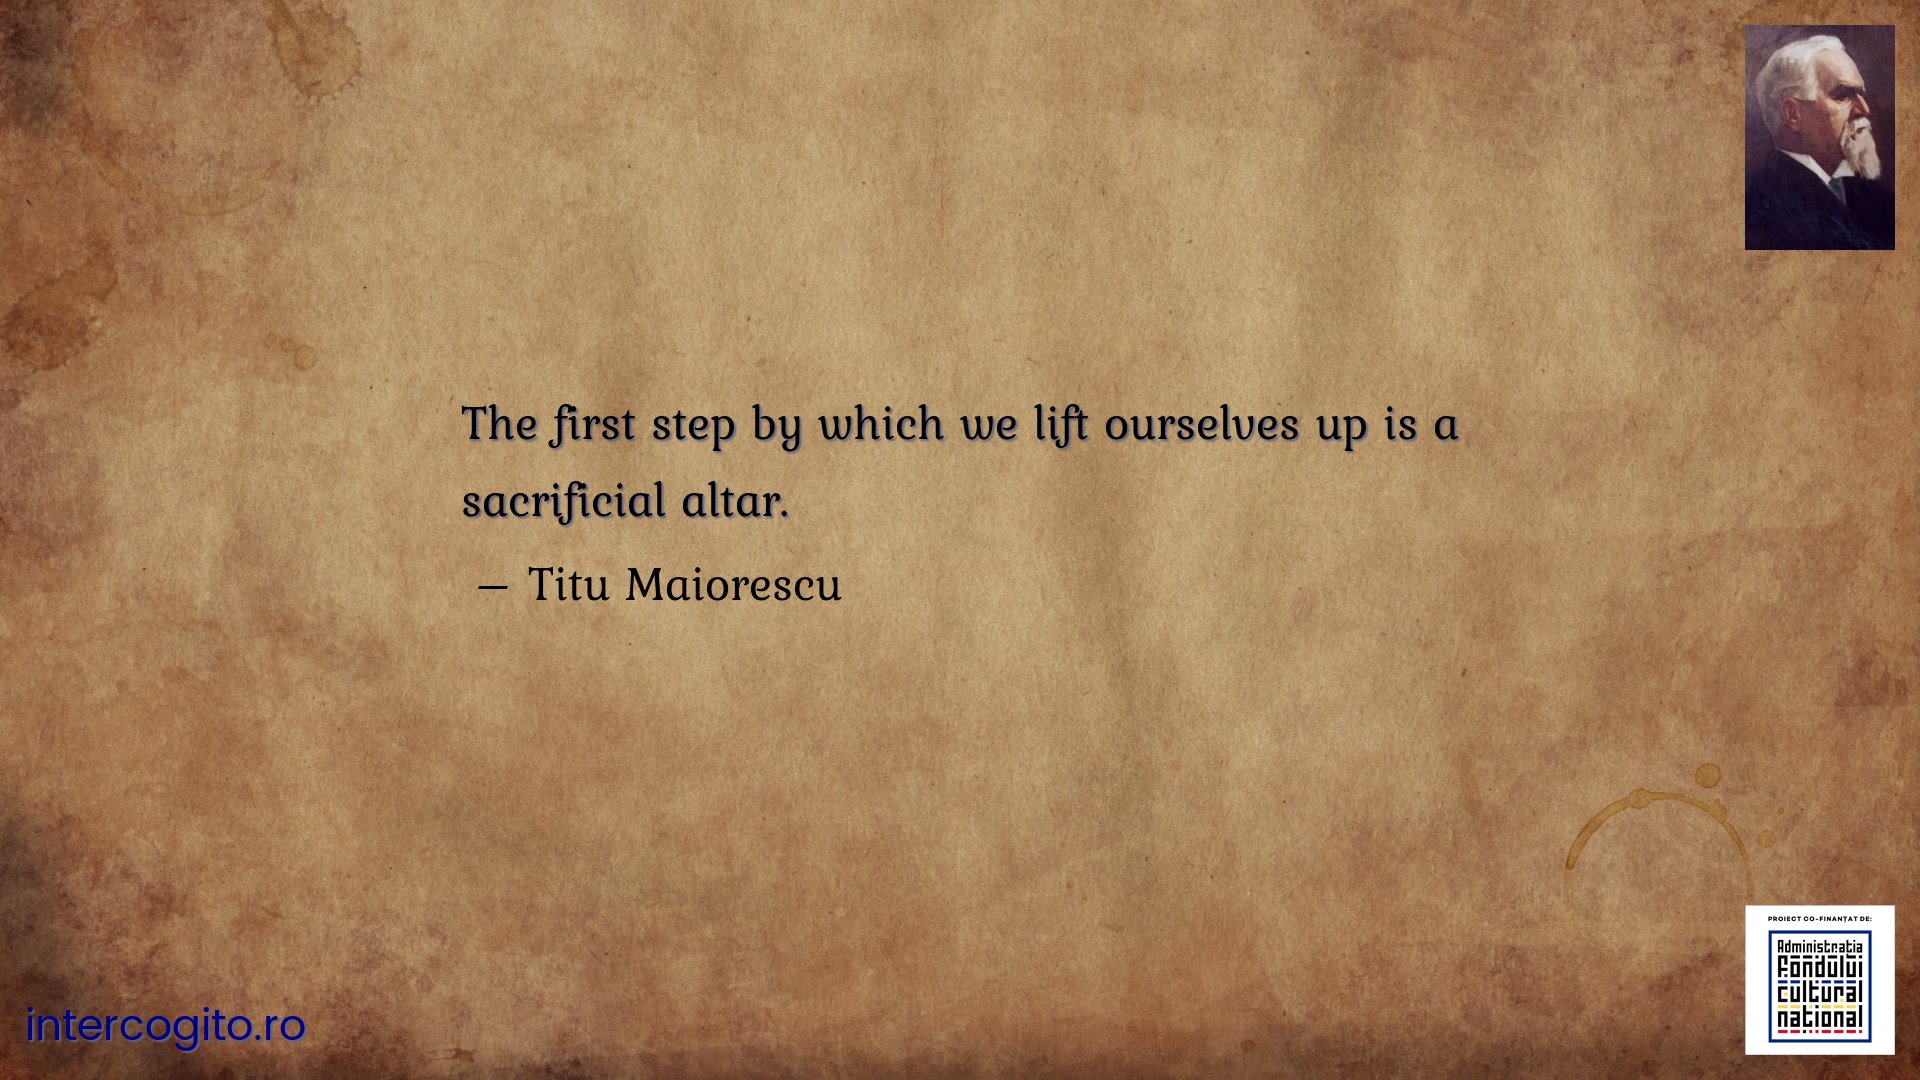 The first step by which we lift ourselves up is a sacrificial altar.